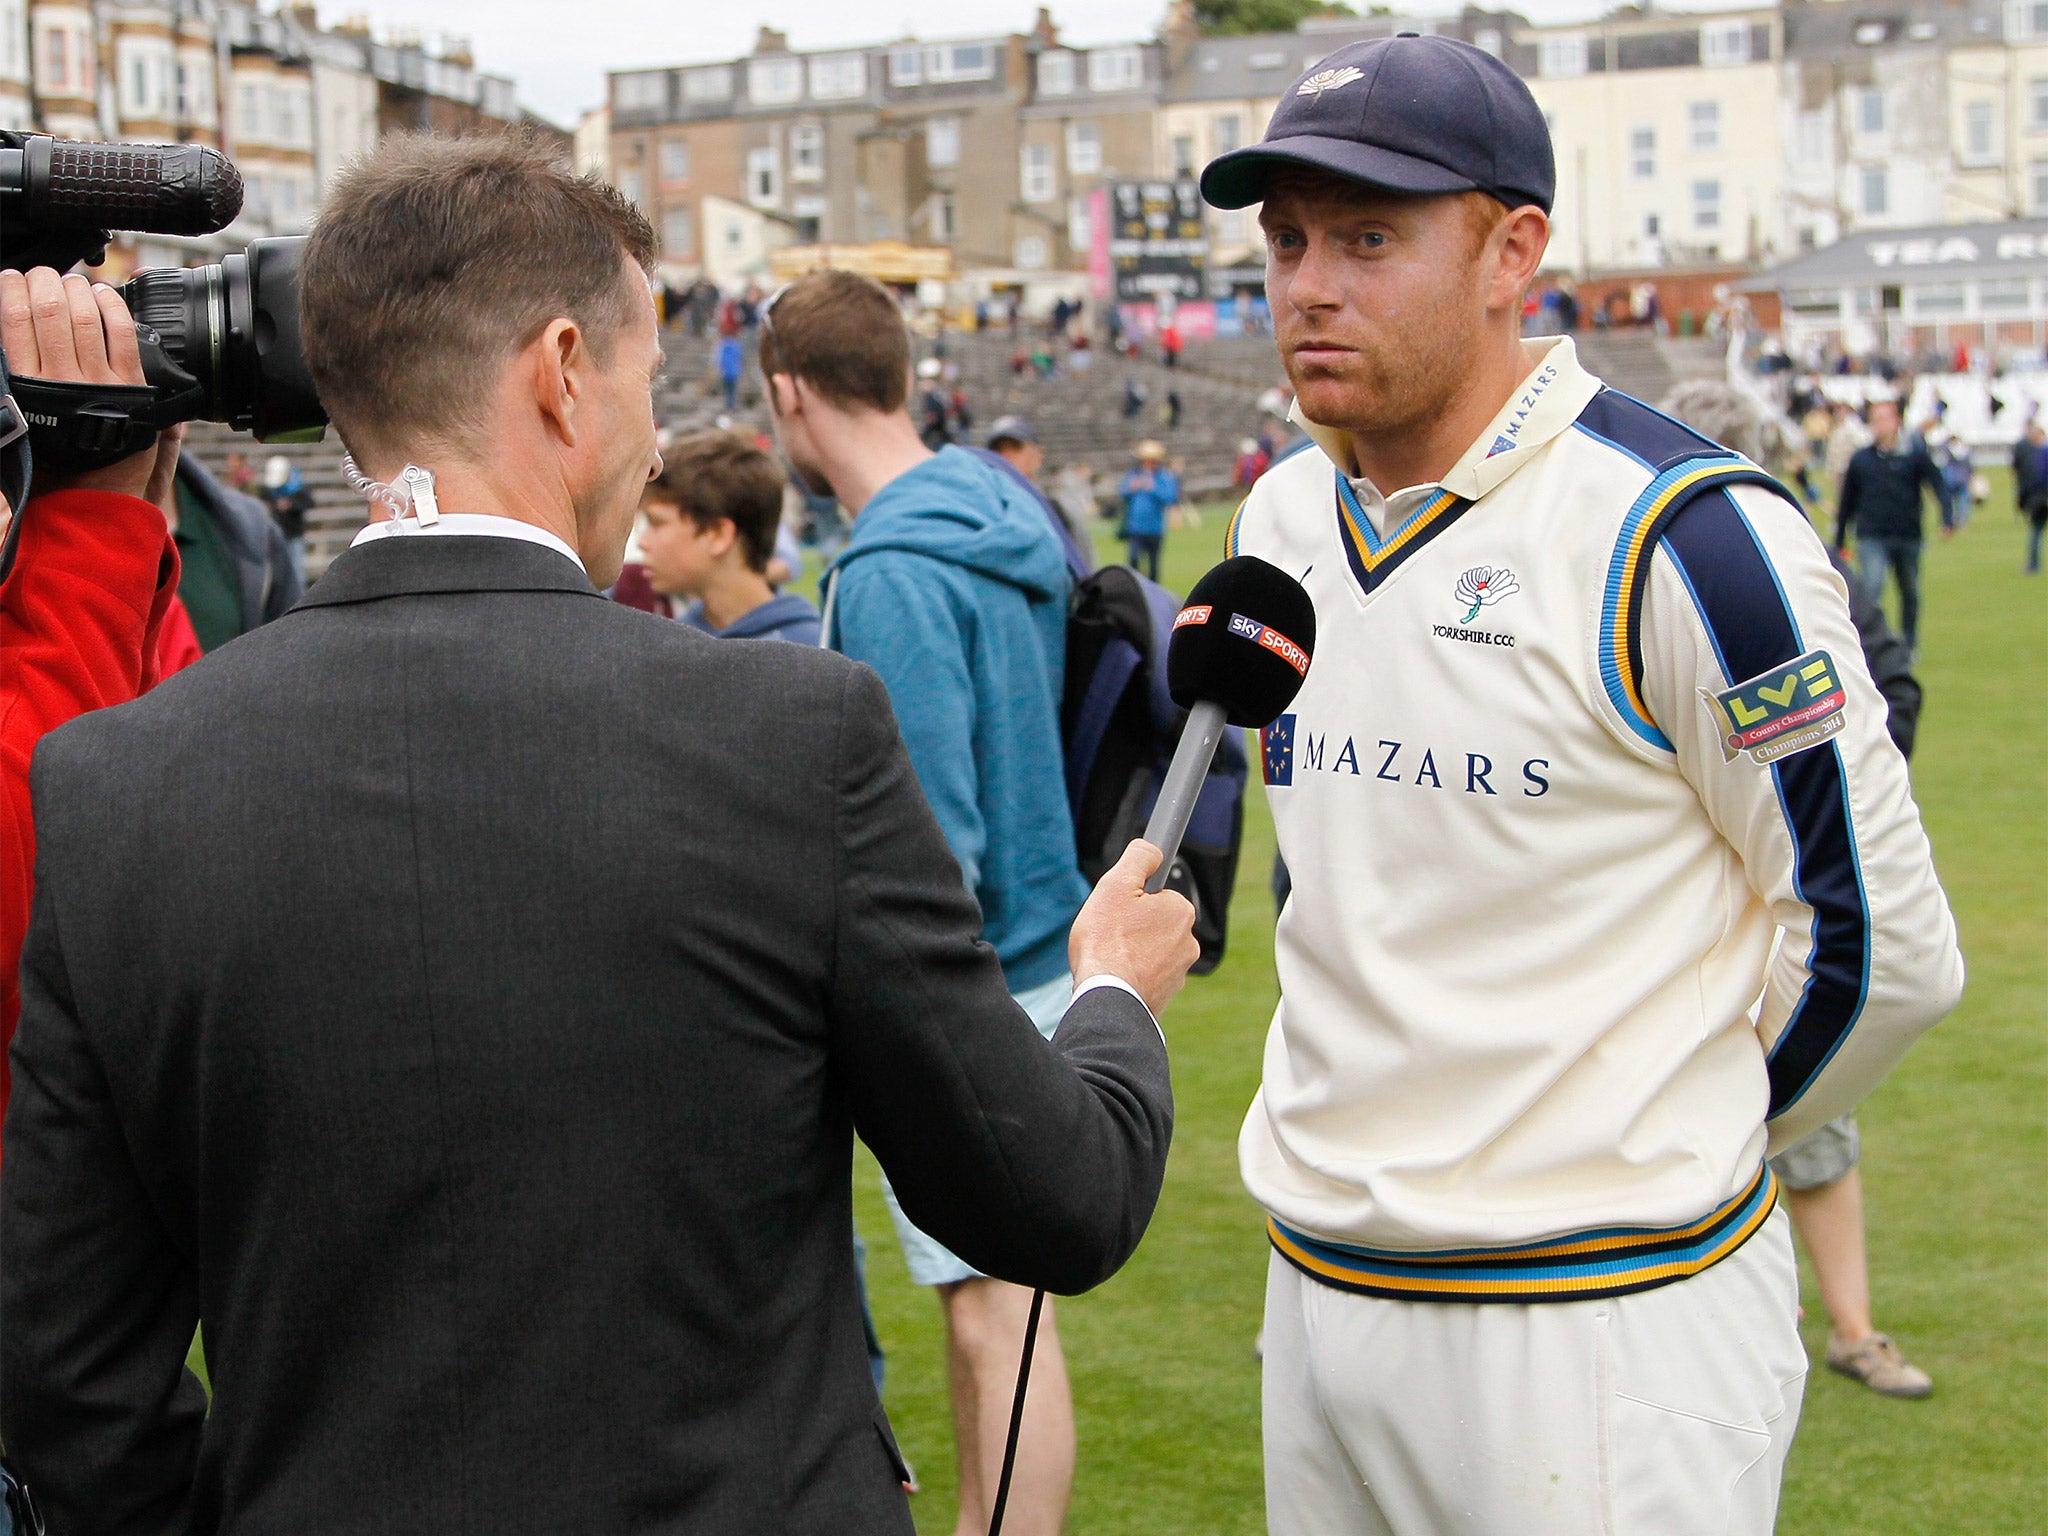 Jonny Bairstow is interviewed by Sky Sports after day three of the LV County Championship division one match between Yorkshire and Worcestershire on Tuesday